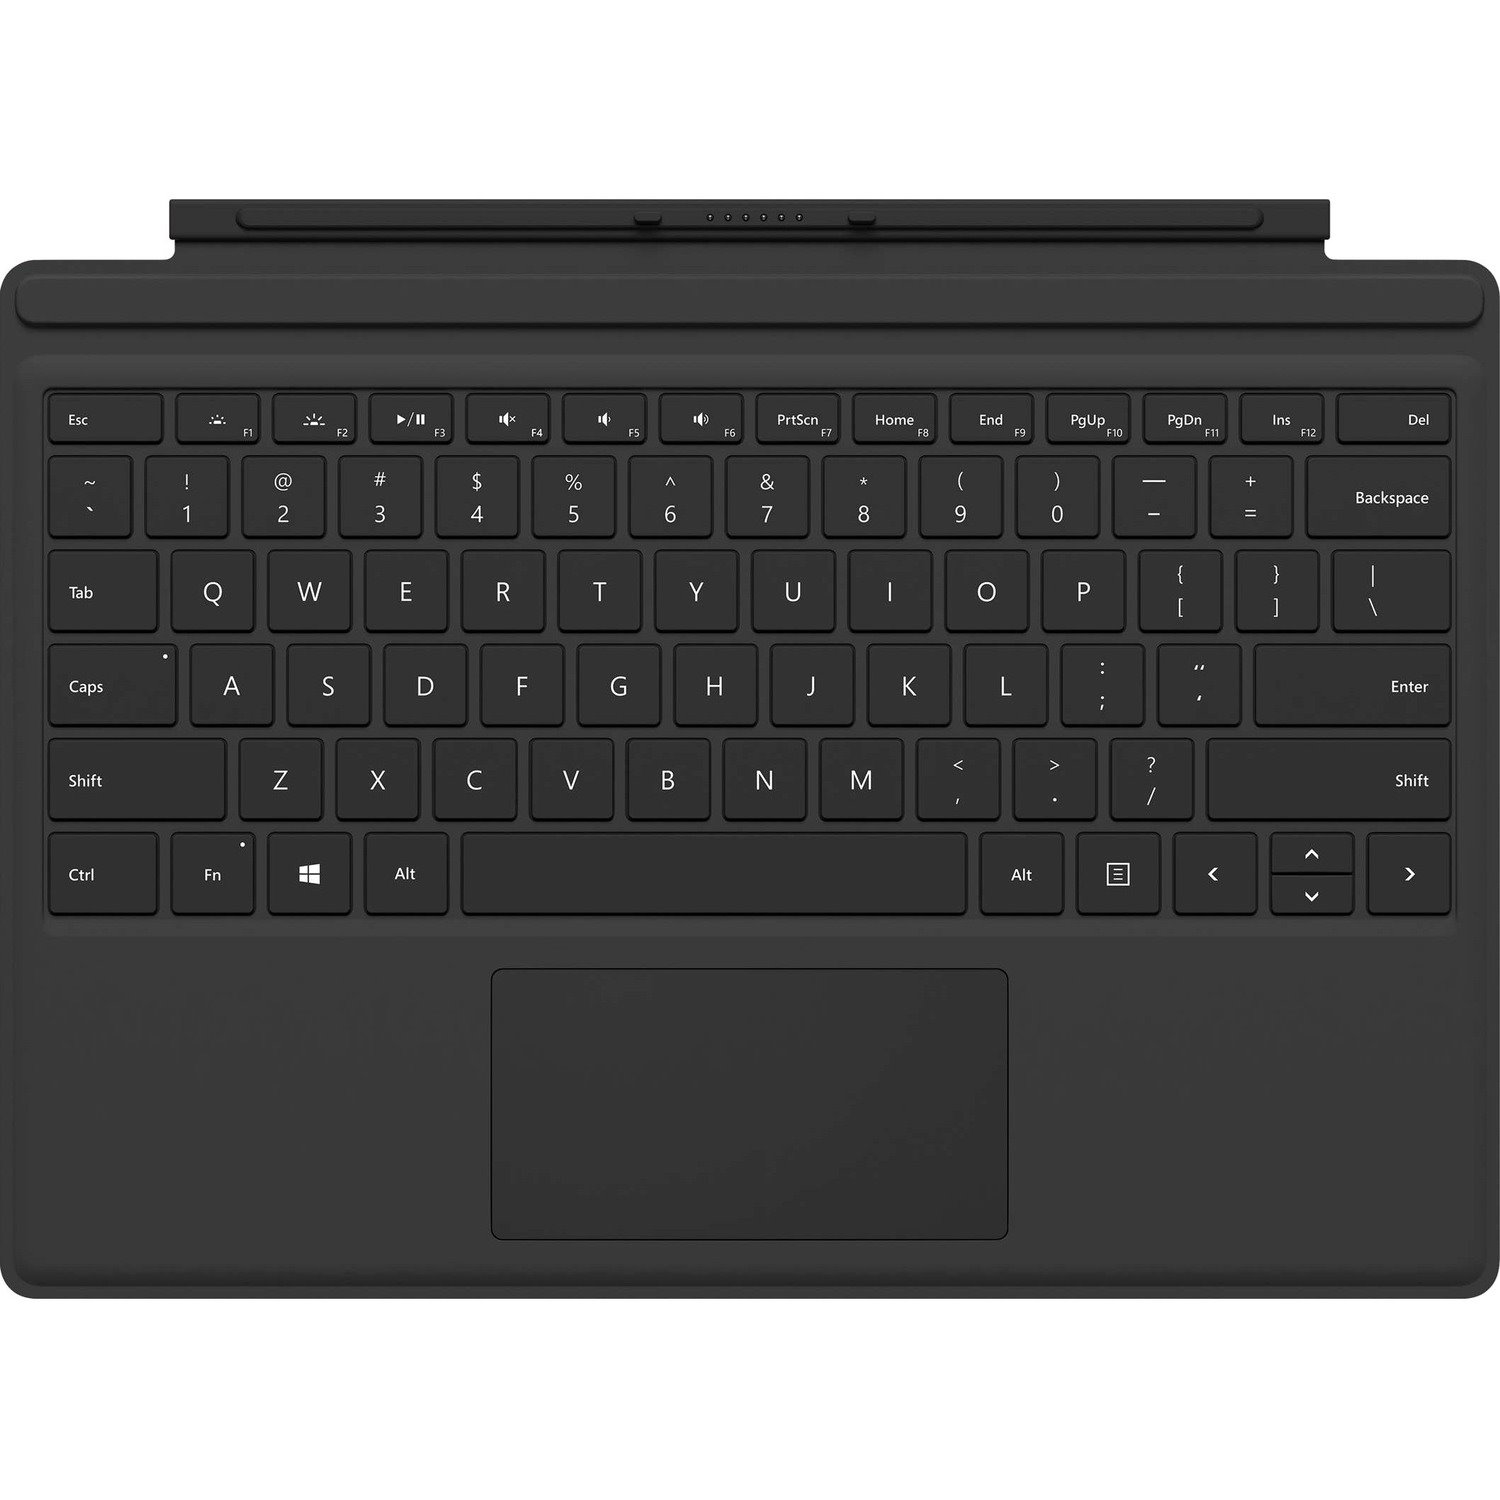 Microsoft Surface Pro Type Cover Keyboard/Cover Case Tablet - Black - Bump Resistant, Scratch Resistant - 4.3 mm Height x 294.9 mm Width x 216.9 mm Depth